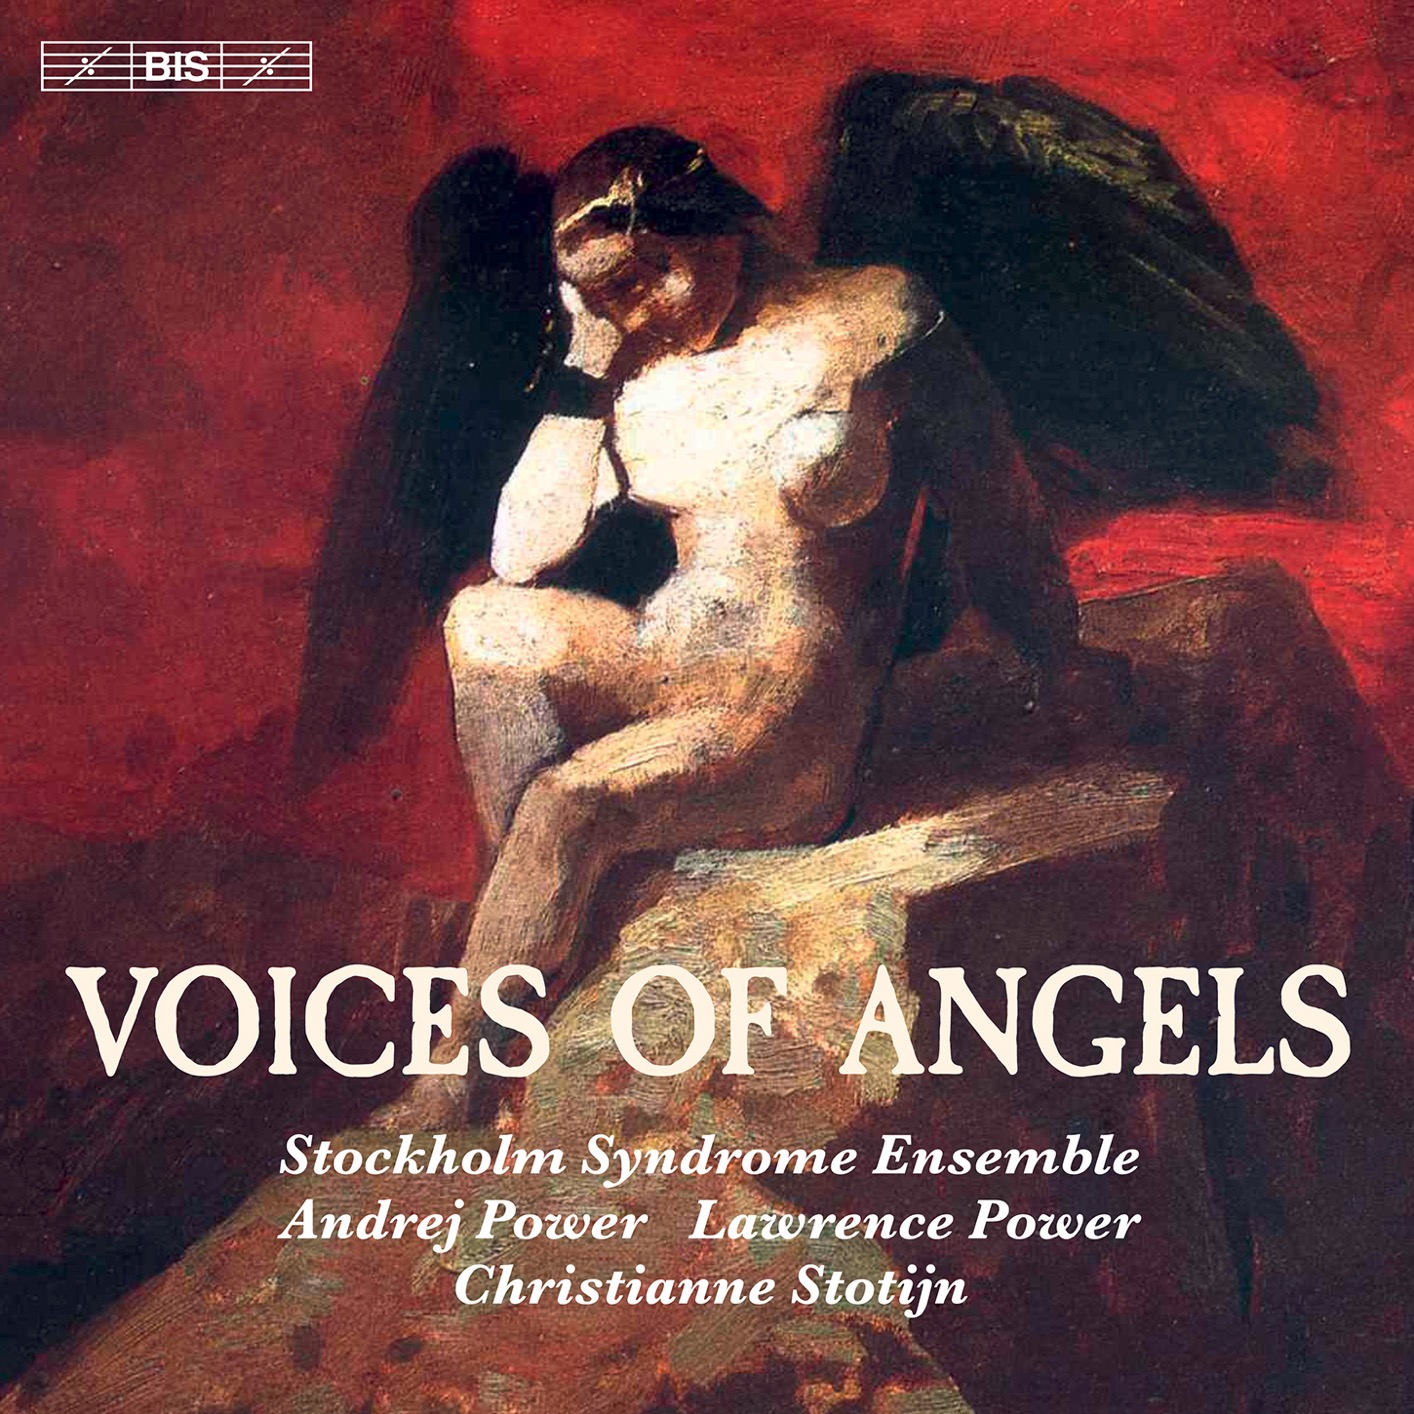 Stockholm Syndrome Ensemble, Andrej Power, Lawrence Power – Voices of Angels (2020) [FLAC 24bit/96kHz]